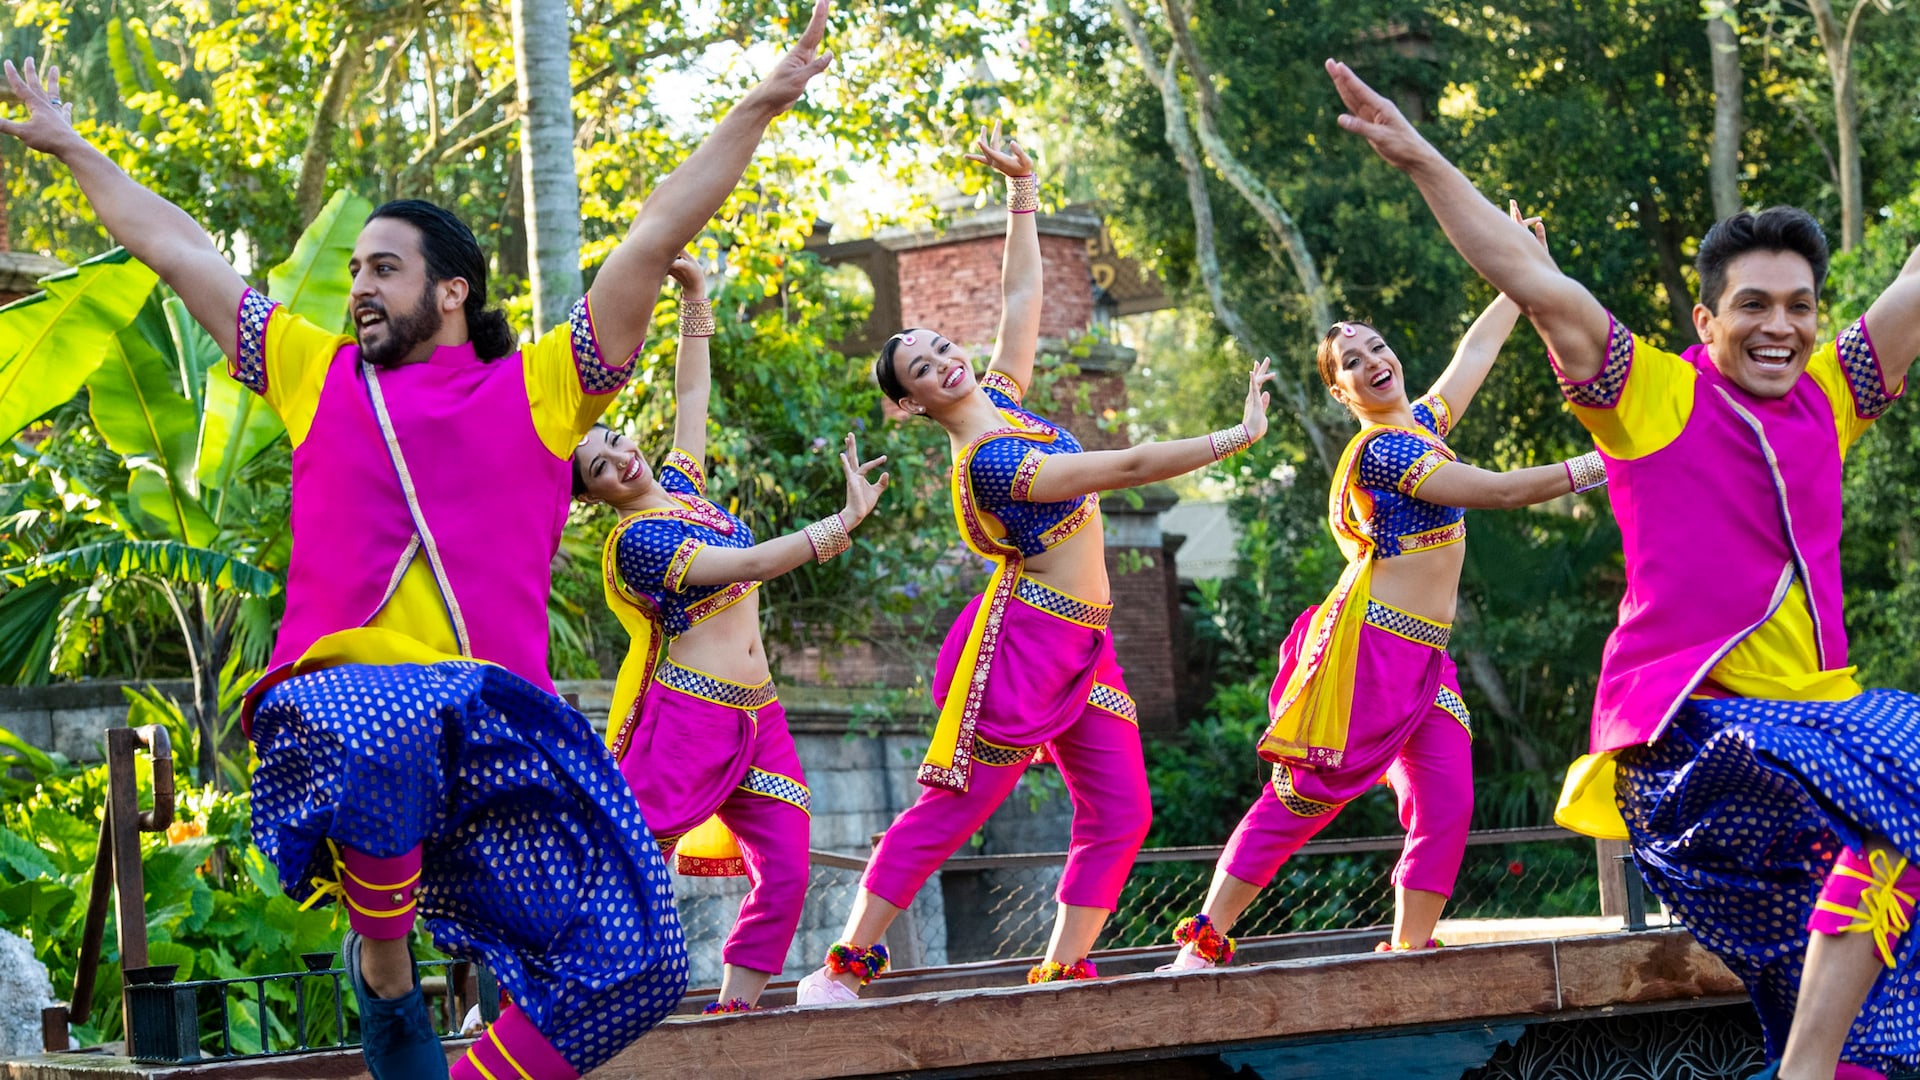 An Indian dance troupe performing in traditional dress, including 3 women dancing on stage while 2 men leap in the foreground